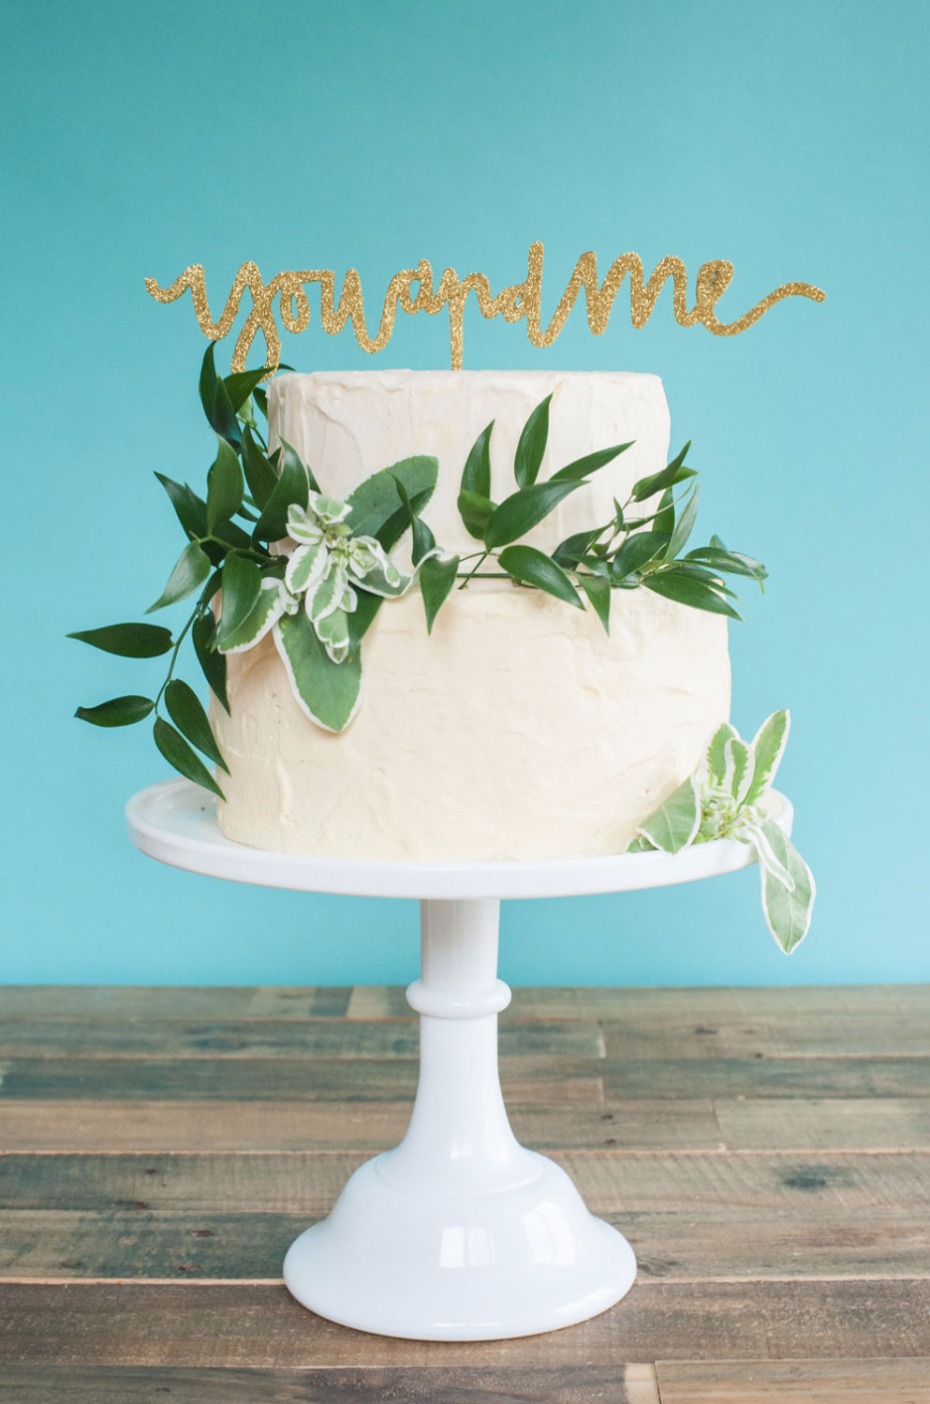 YOU AND ME wedding cake topper in gold glitter and other colors